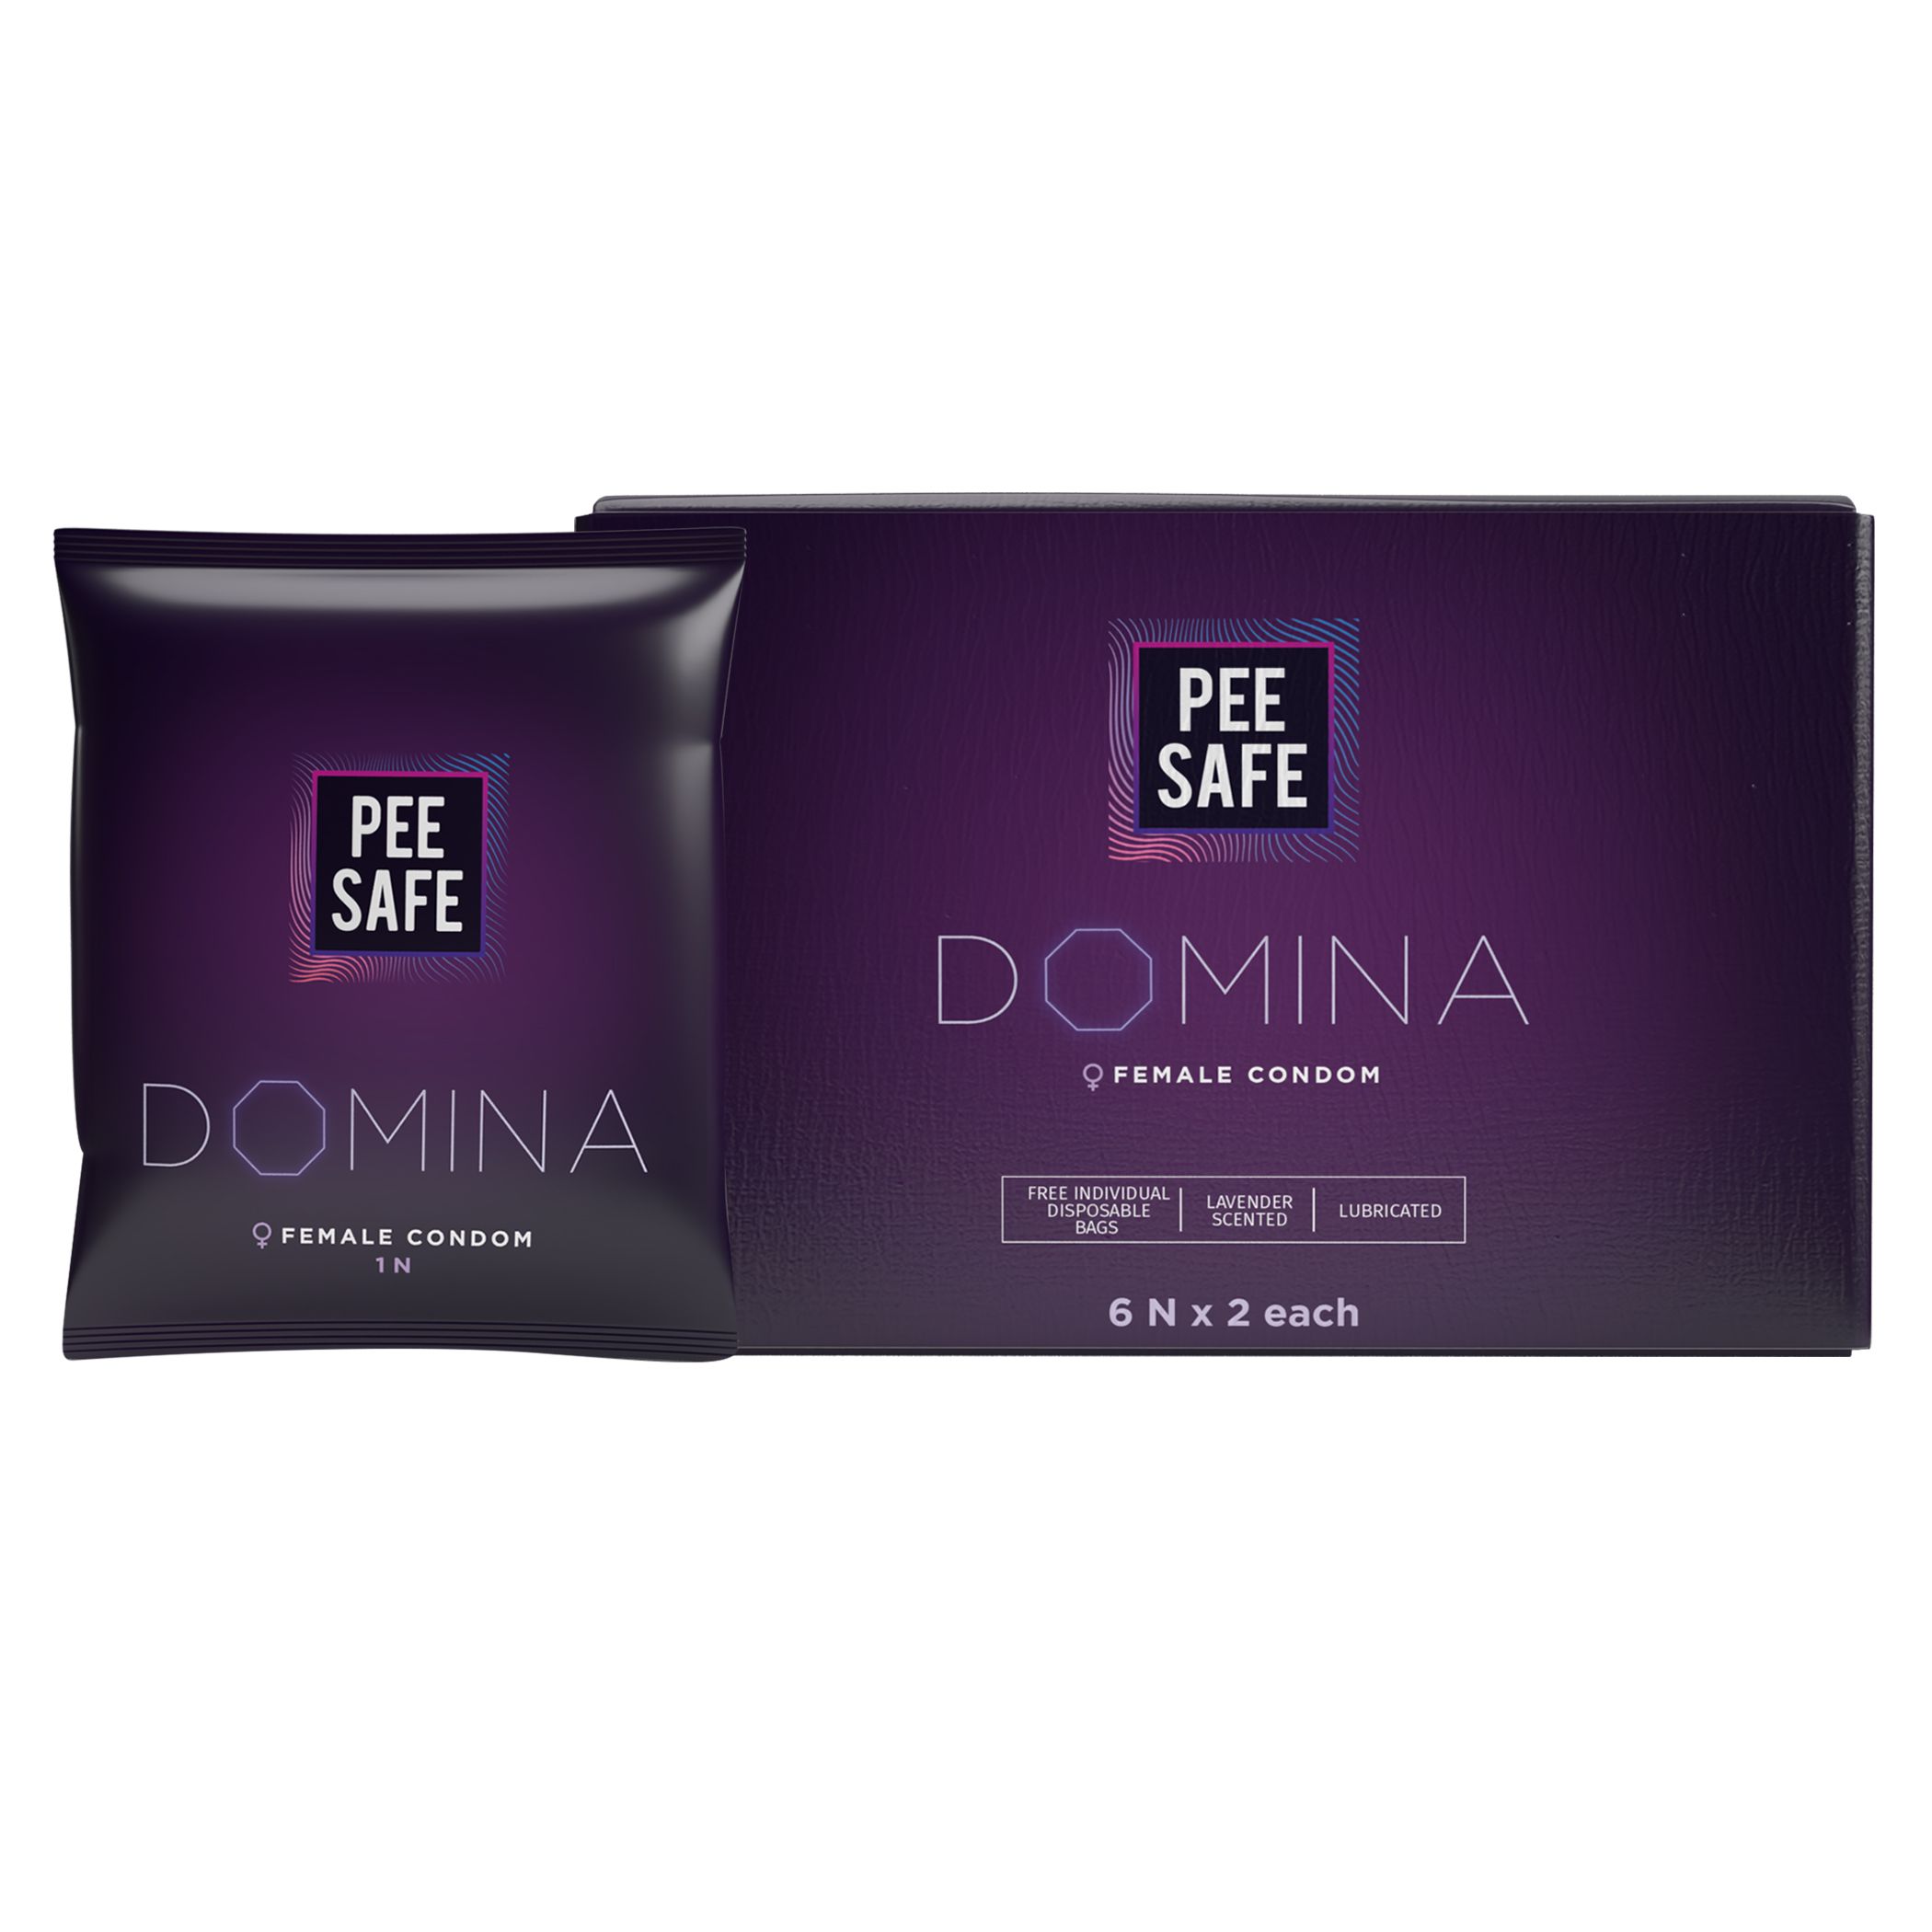 Pee Safe Domina Female Condom No Artificial Colour Dye Made with Natural Rubber Latex Lavender Fragrance With Biodegradable Disposable Bags, 12 count